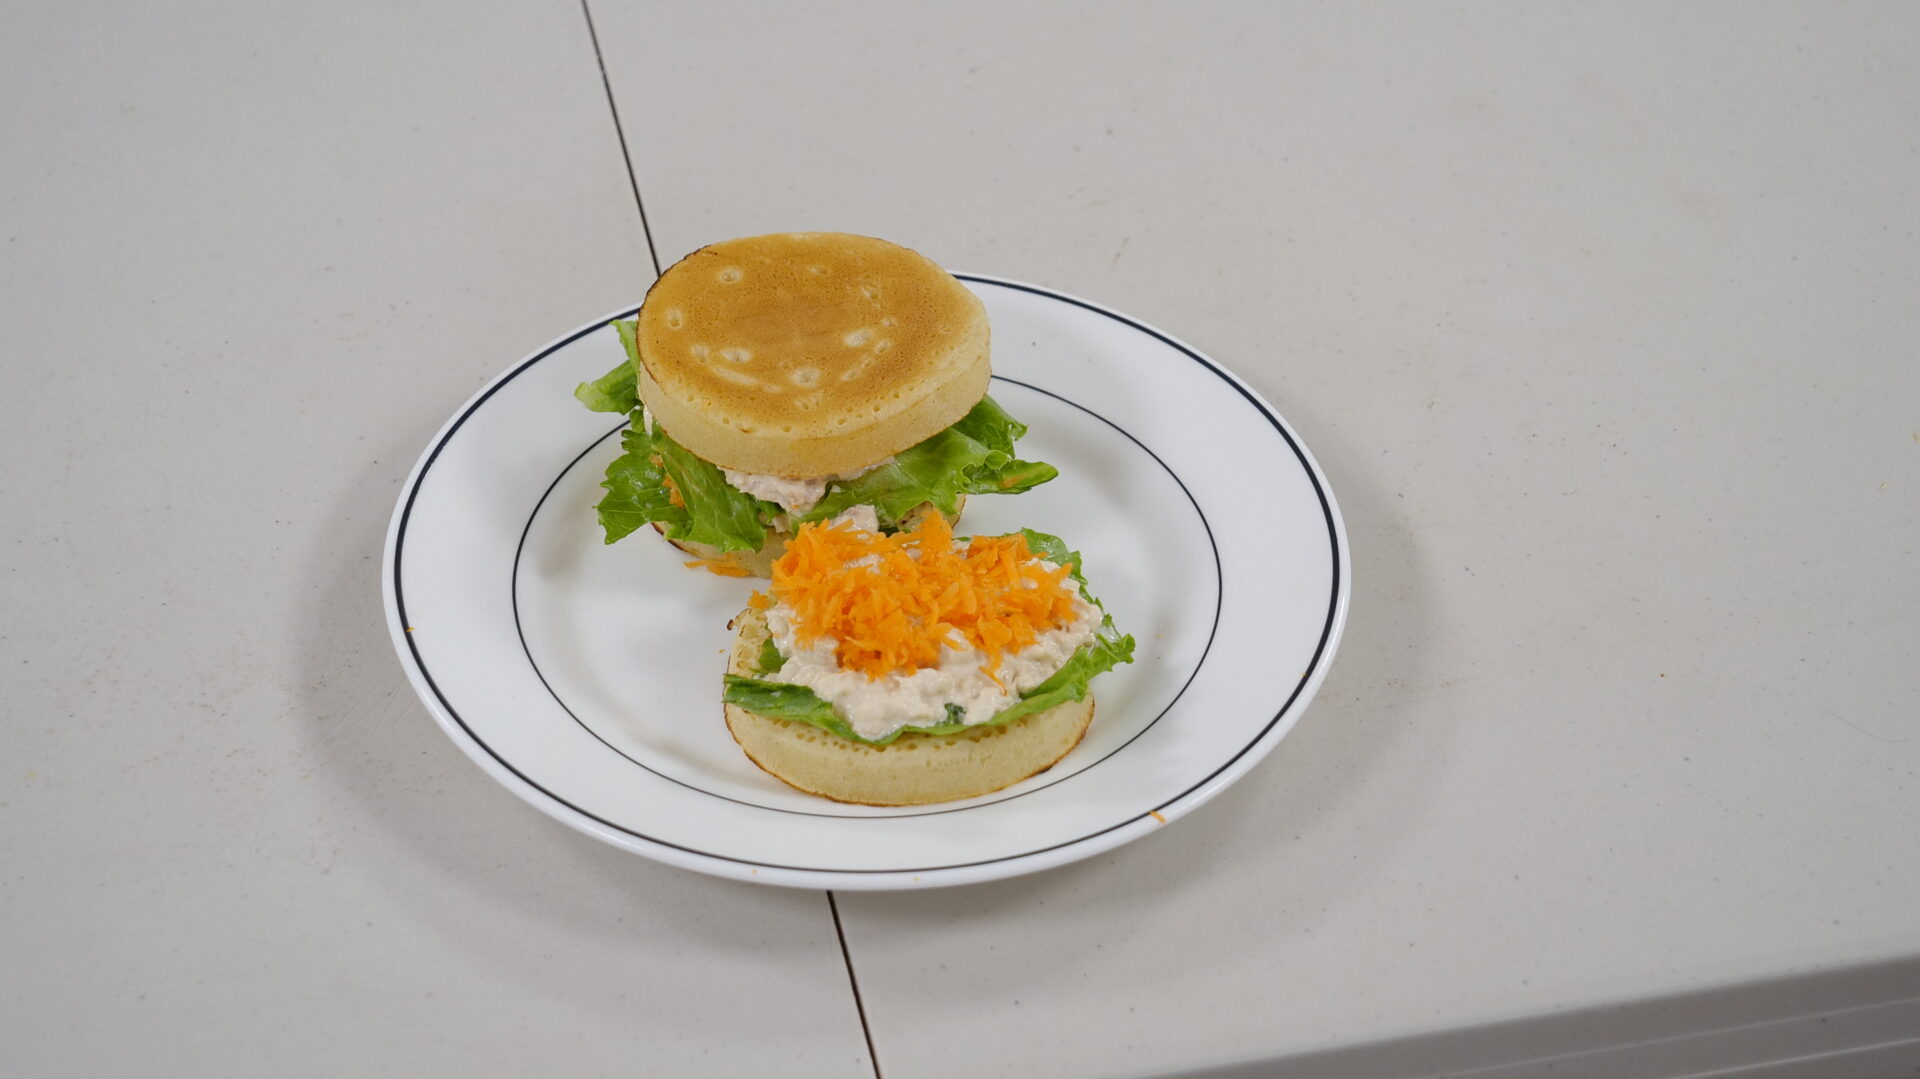 A sandwich on a plate with lettuce and orange.